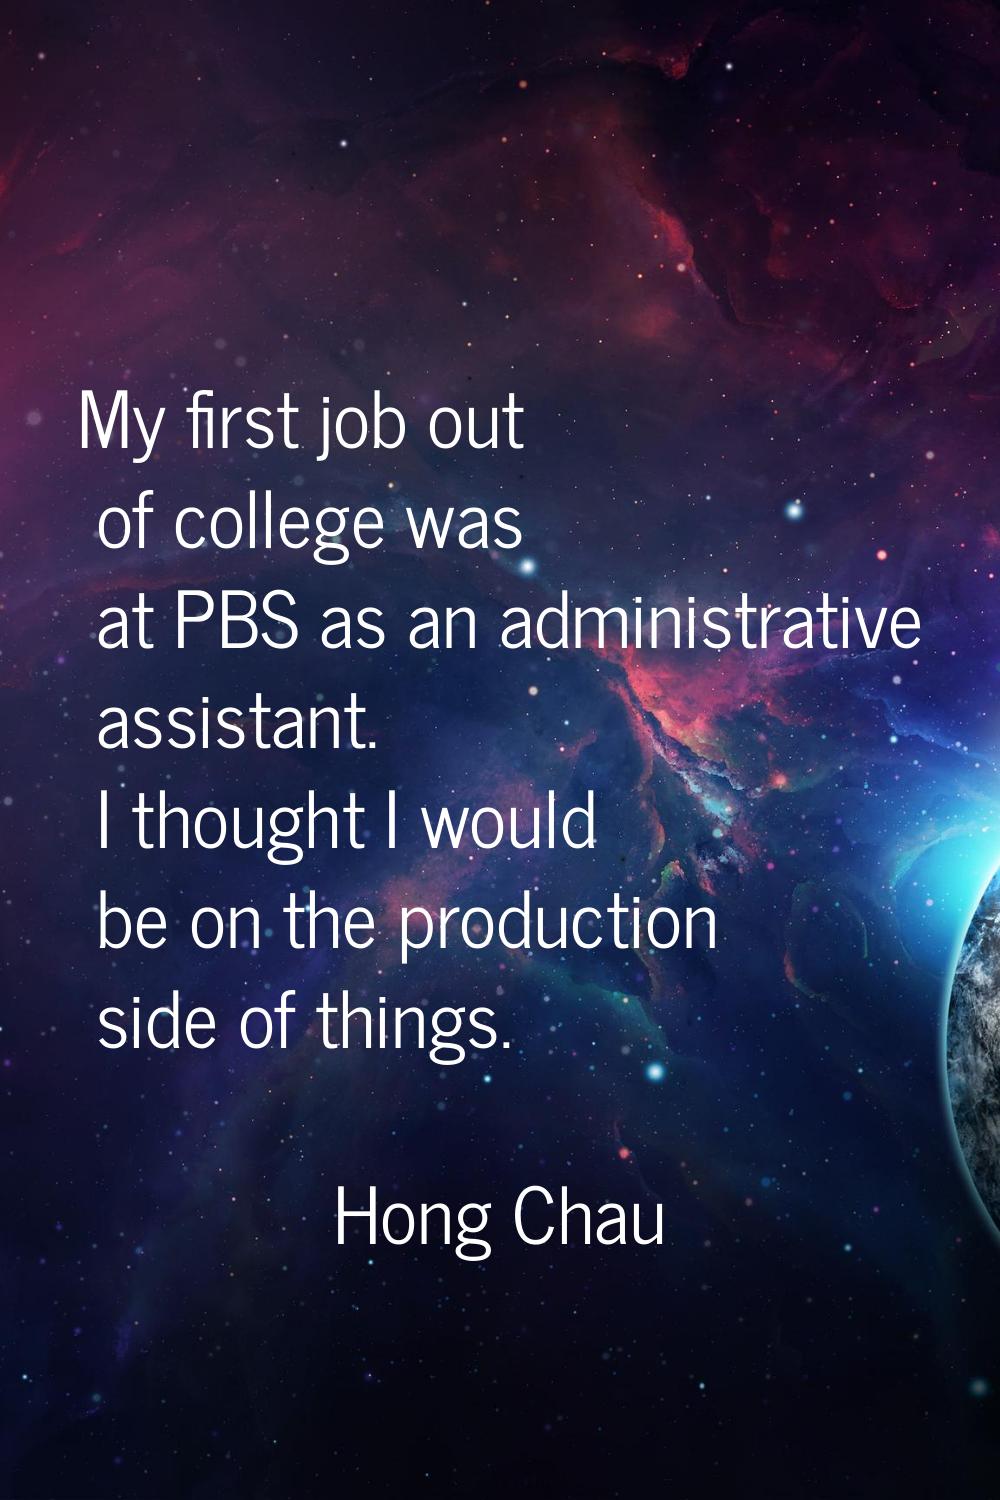 My first job out of college was at PBS as an administrative assistant. I thought I would be on the 